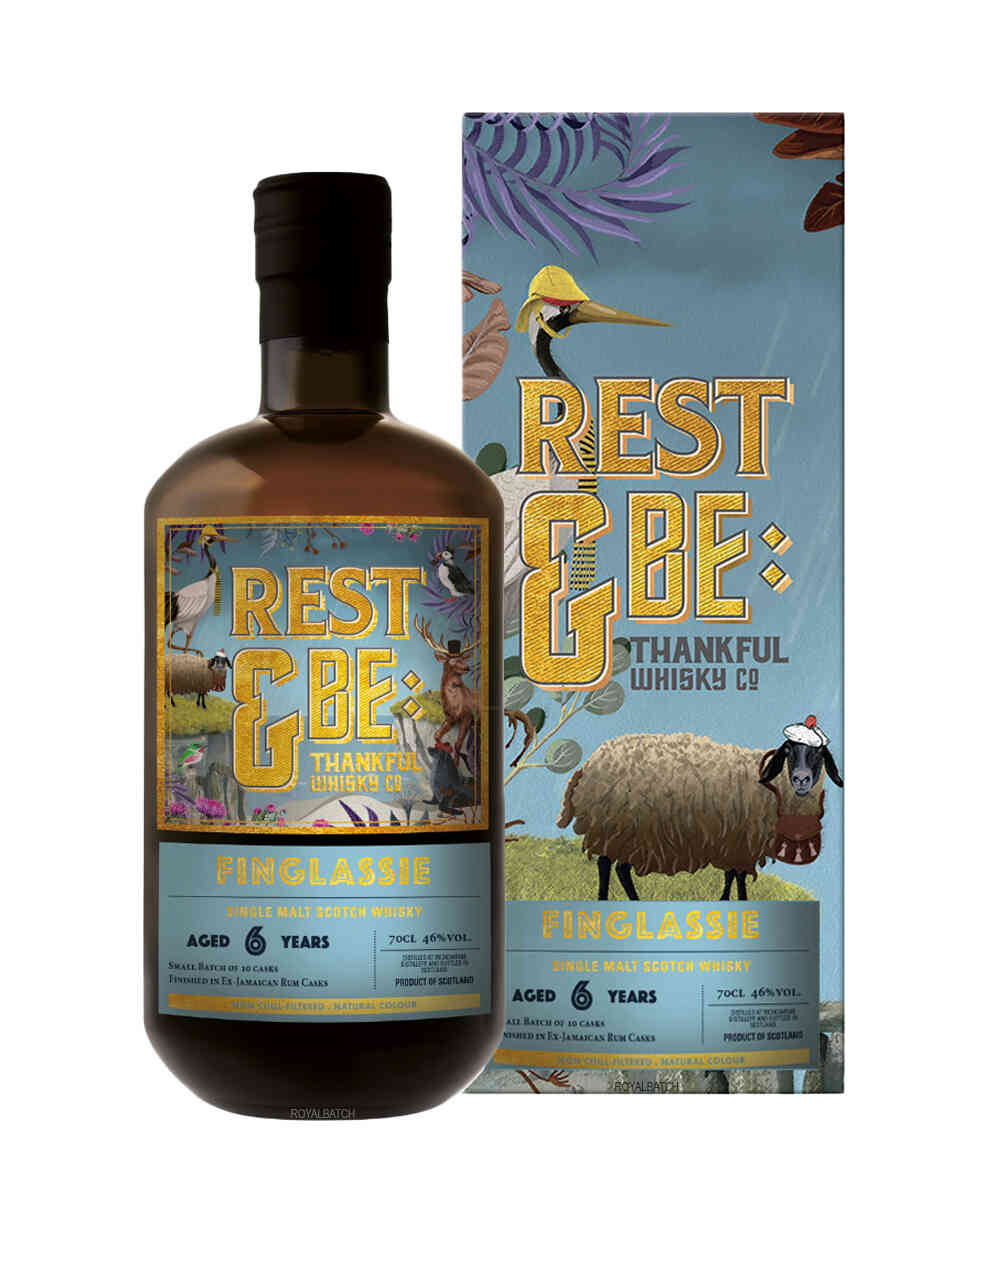 Rest and Be Thankful Whiskey Co Finglassie 6 Year old Single Malt Scotch Whisky